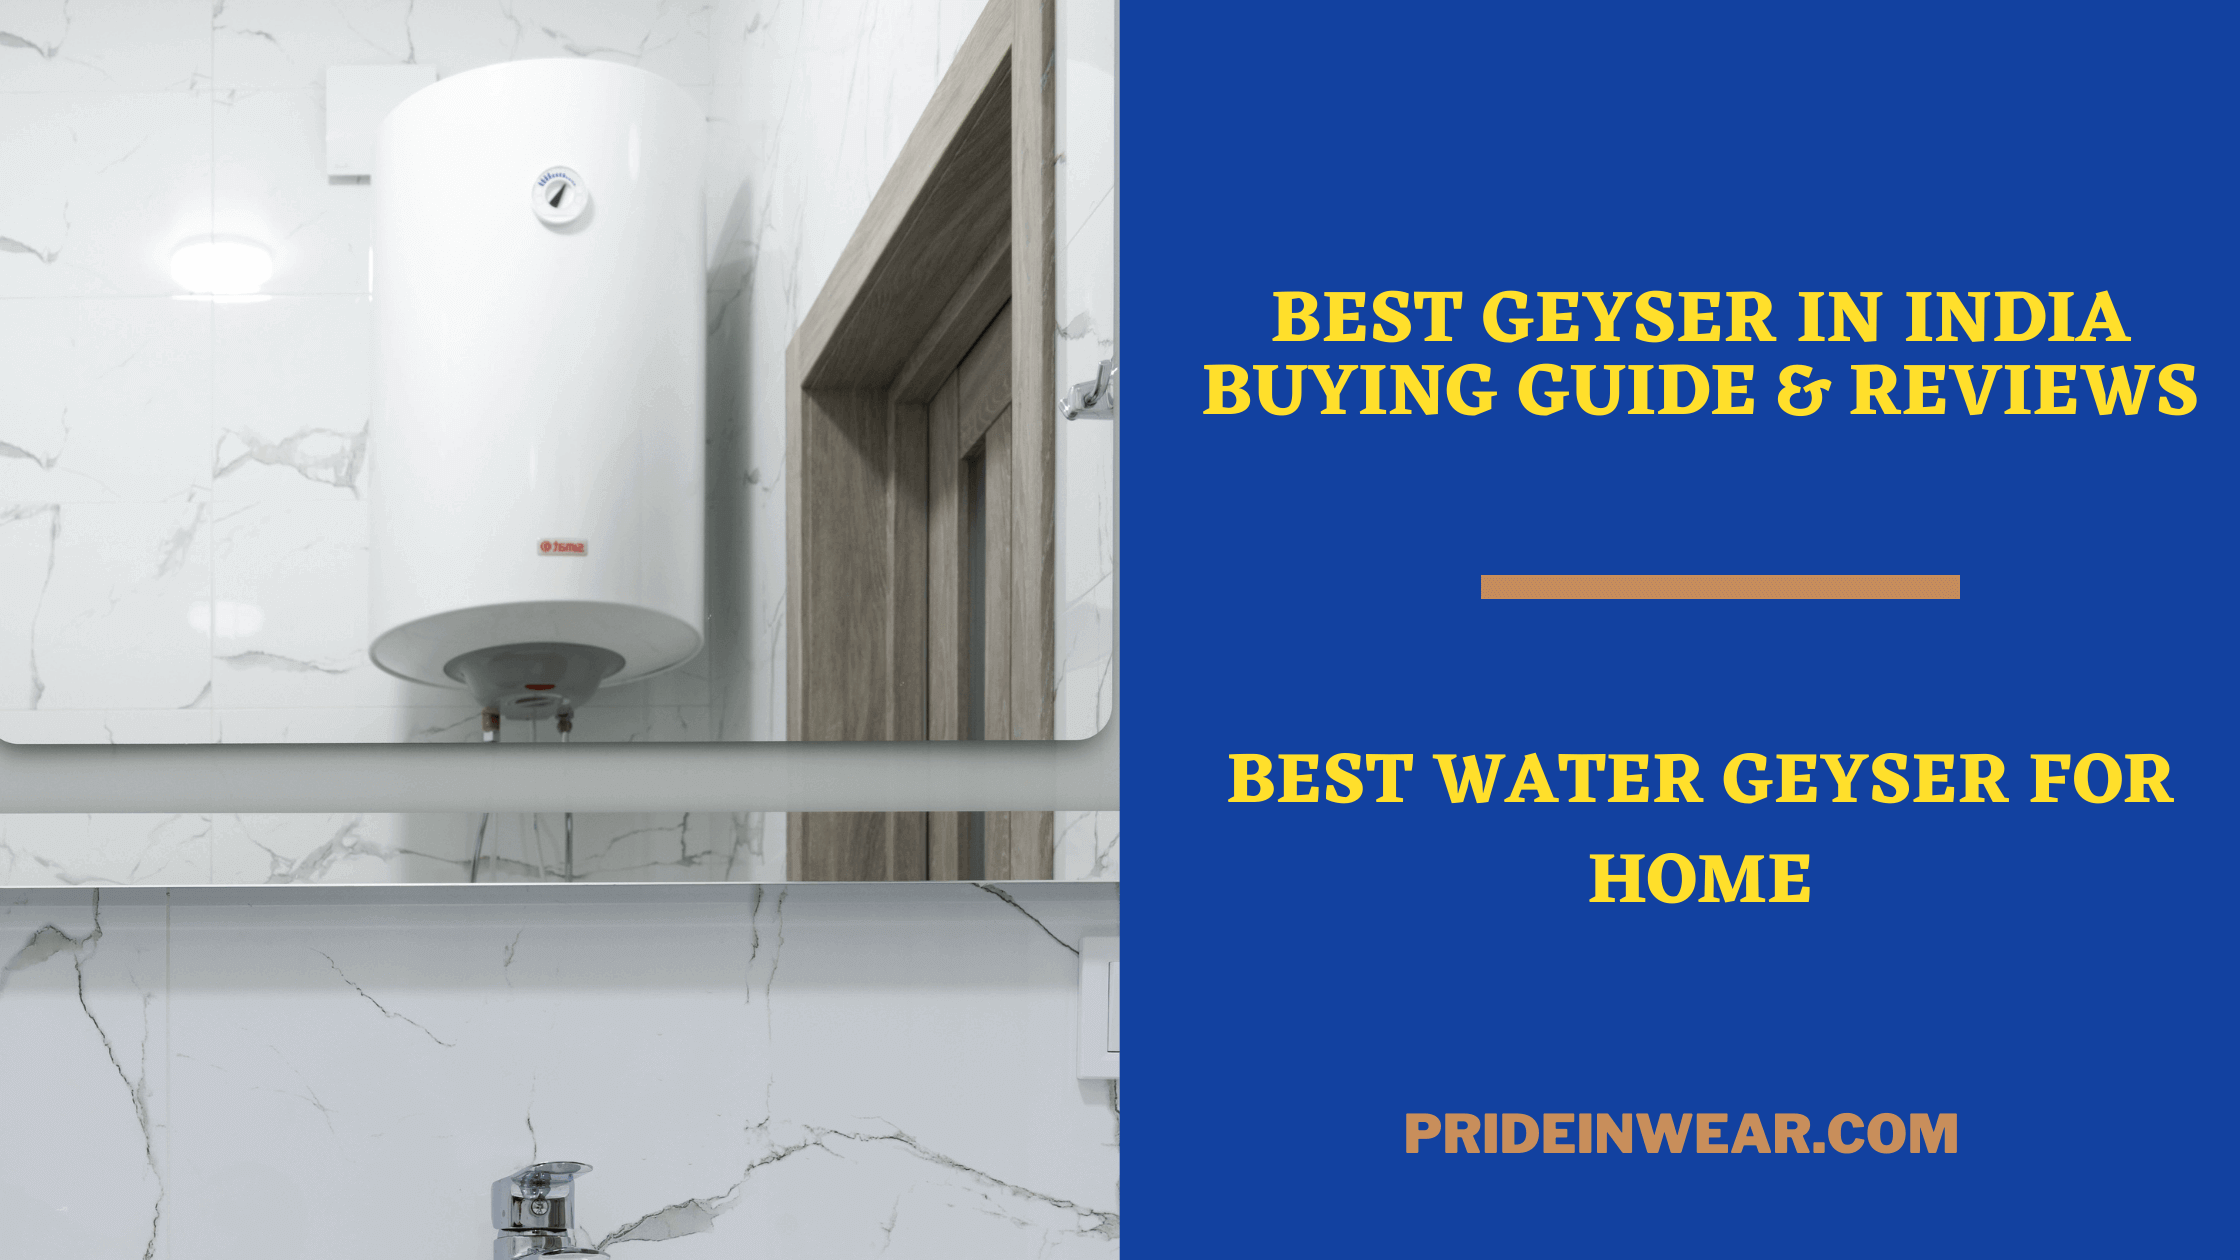 Best Geysers In India For Home